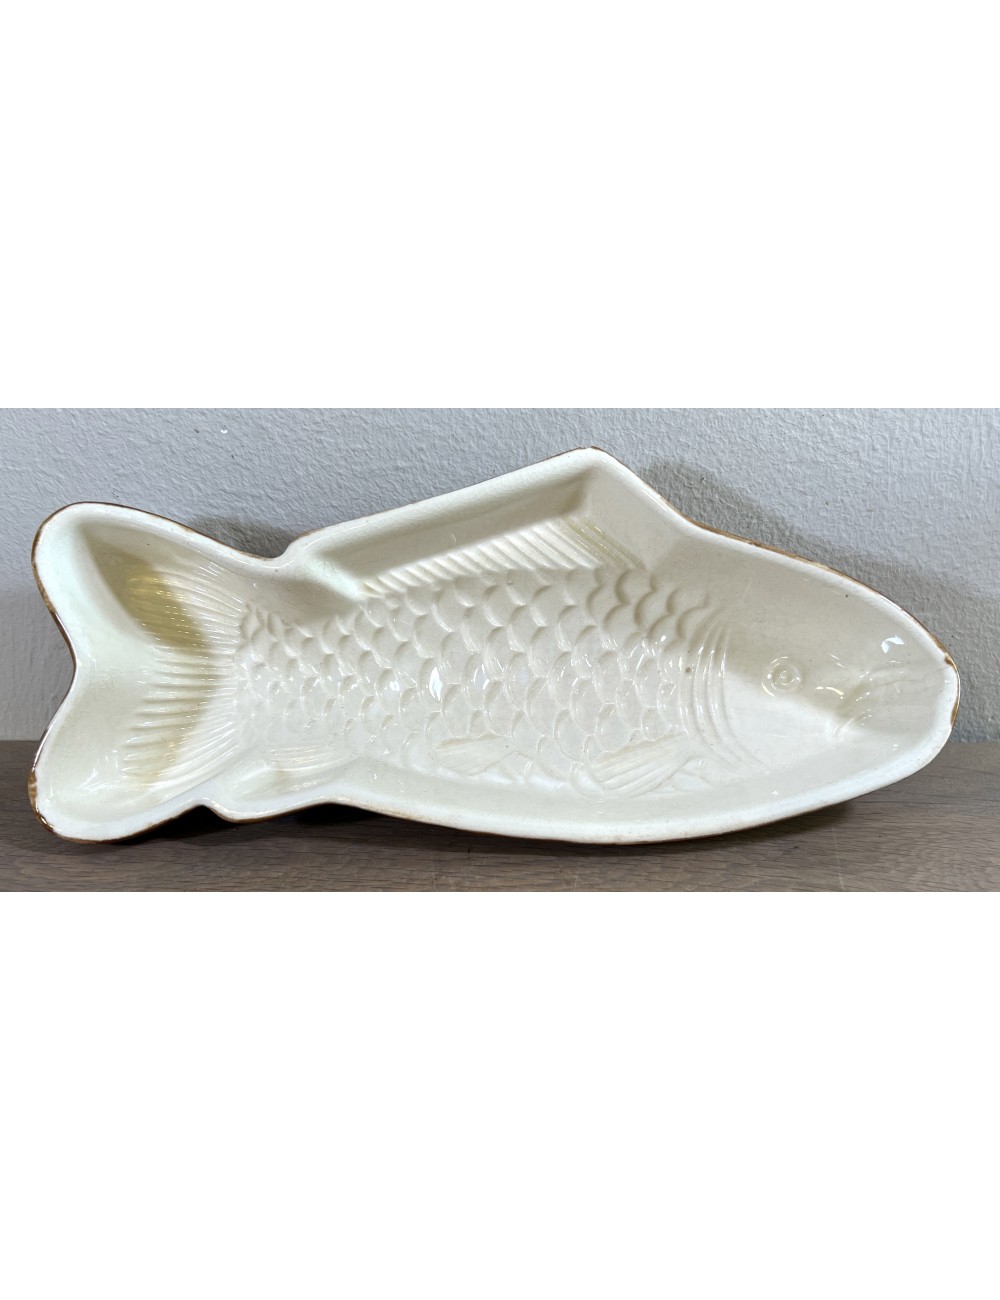 Pudding mold - in the shape of a fish - Villeroy & Boch - made of brown ceramic